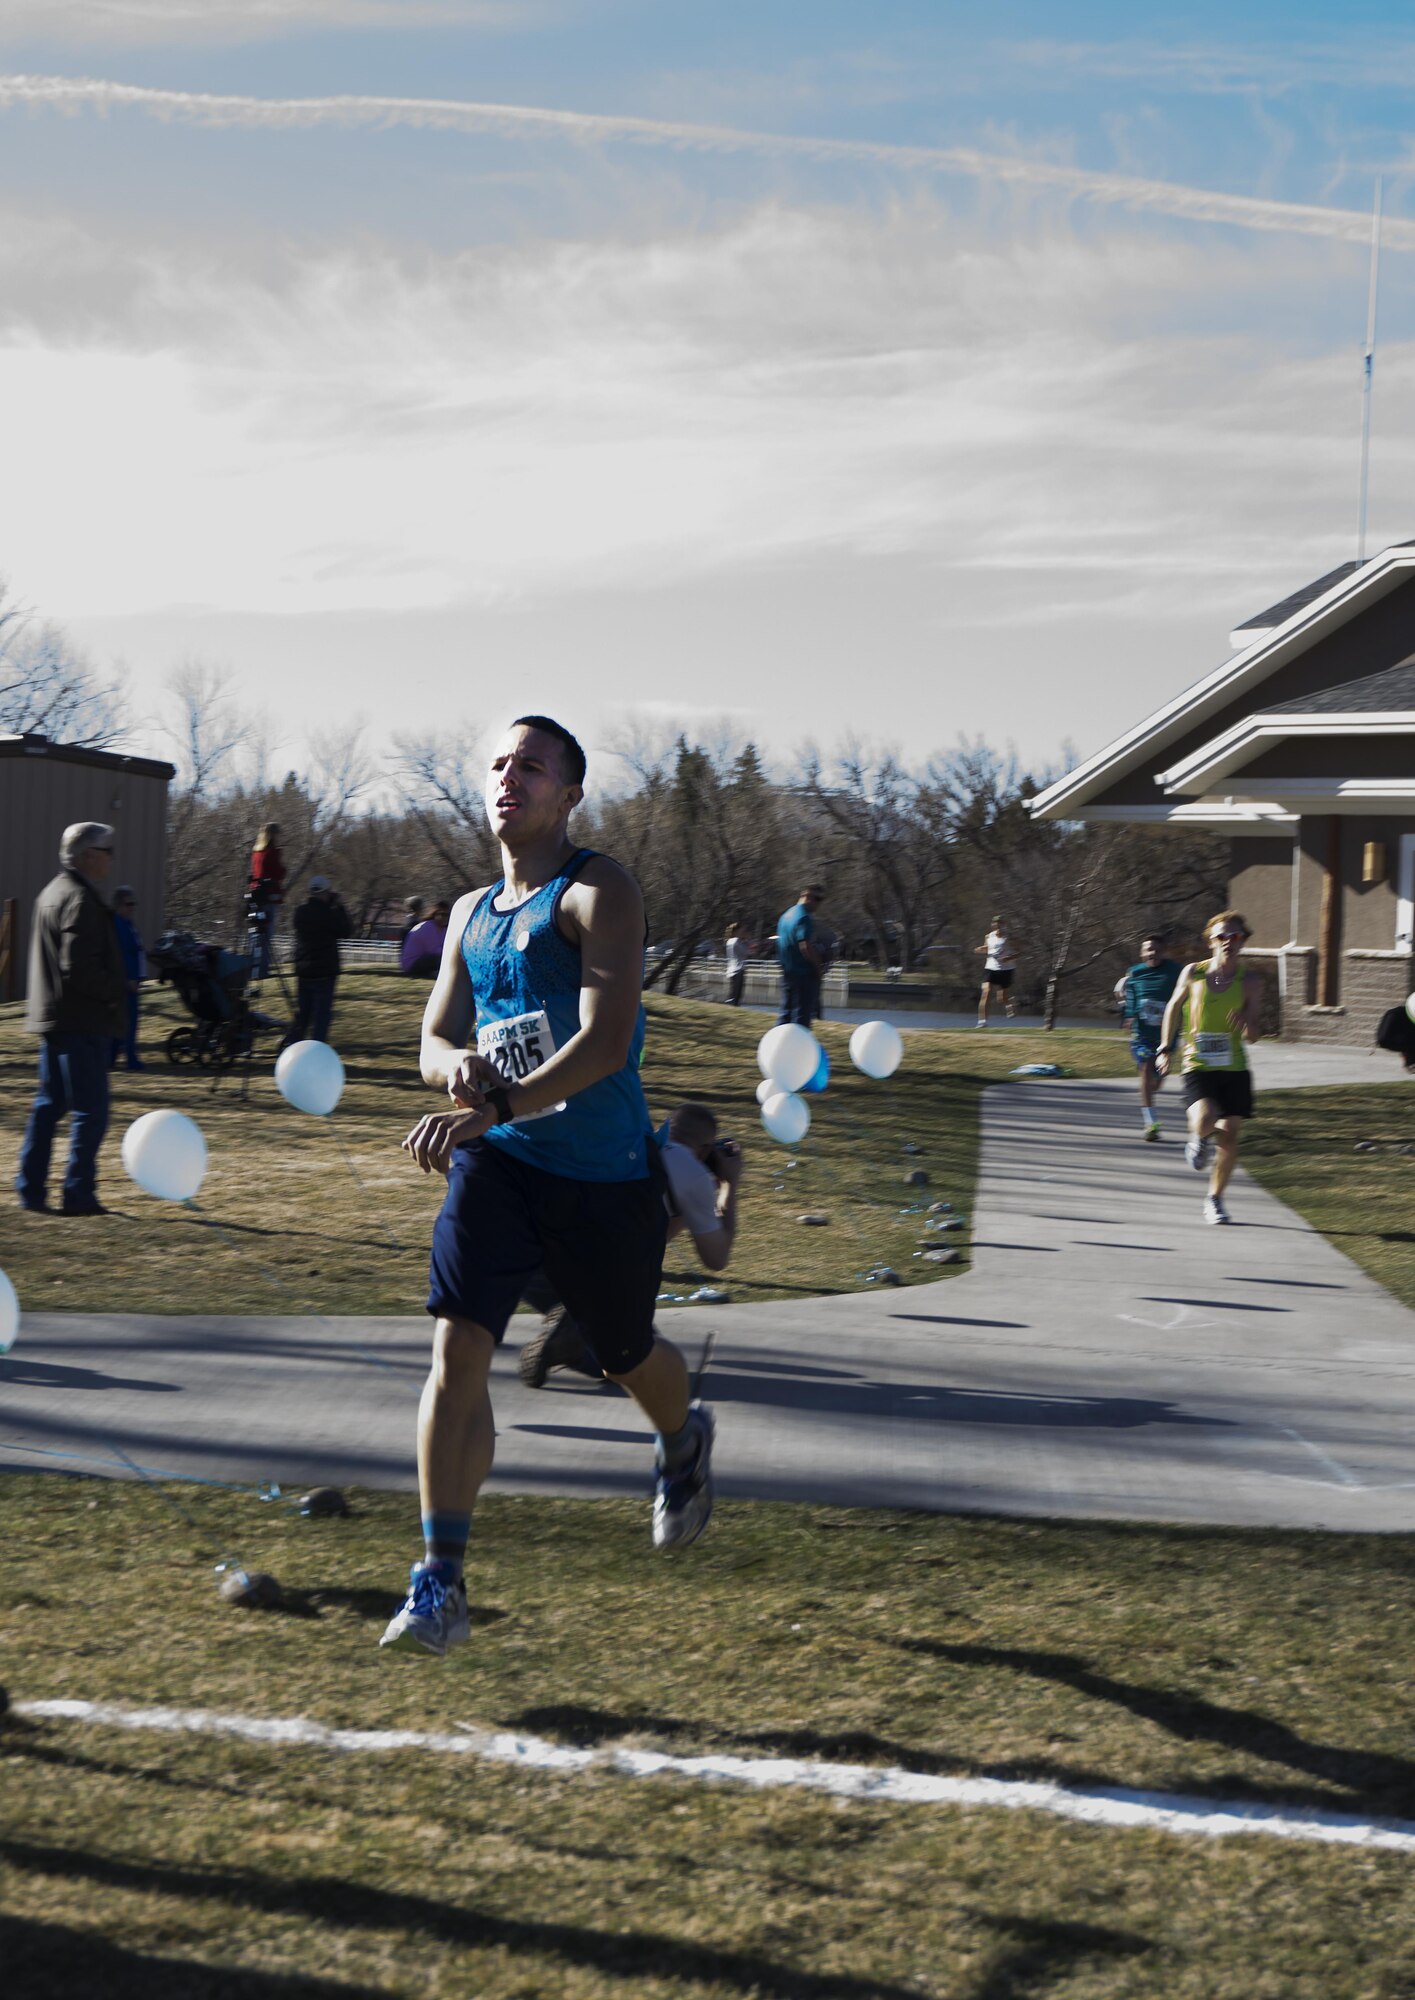 Senior Airman Eric Irizarry, 90th Medical Support Squadron, crosses the finish line of the Sexual Assault Awareness 5-kilometer race April 9, 2016, in Lion’s Park, Cheyenne, Wyo. Irizarry finished second for males, with Senior Airman Aaron Hurtado, 790th Missile Security Forces Squadron, finishing in first place. (U.S. Air Force photo by Senior Airman Brandon Valle